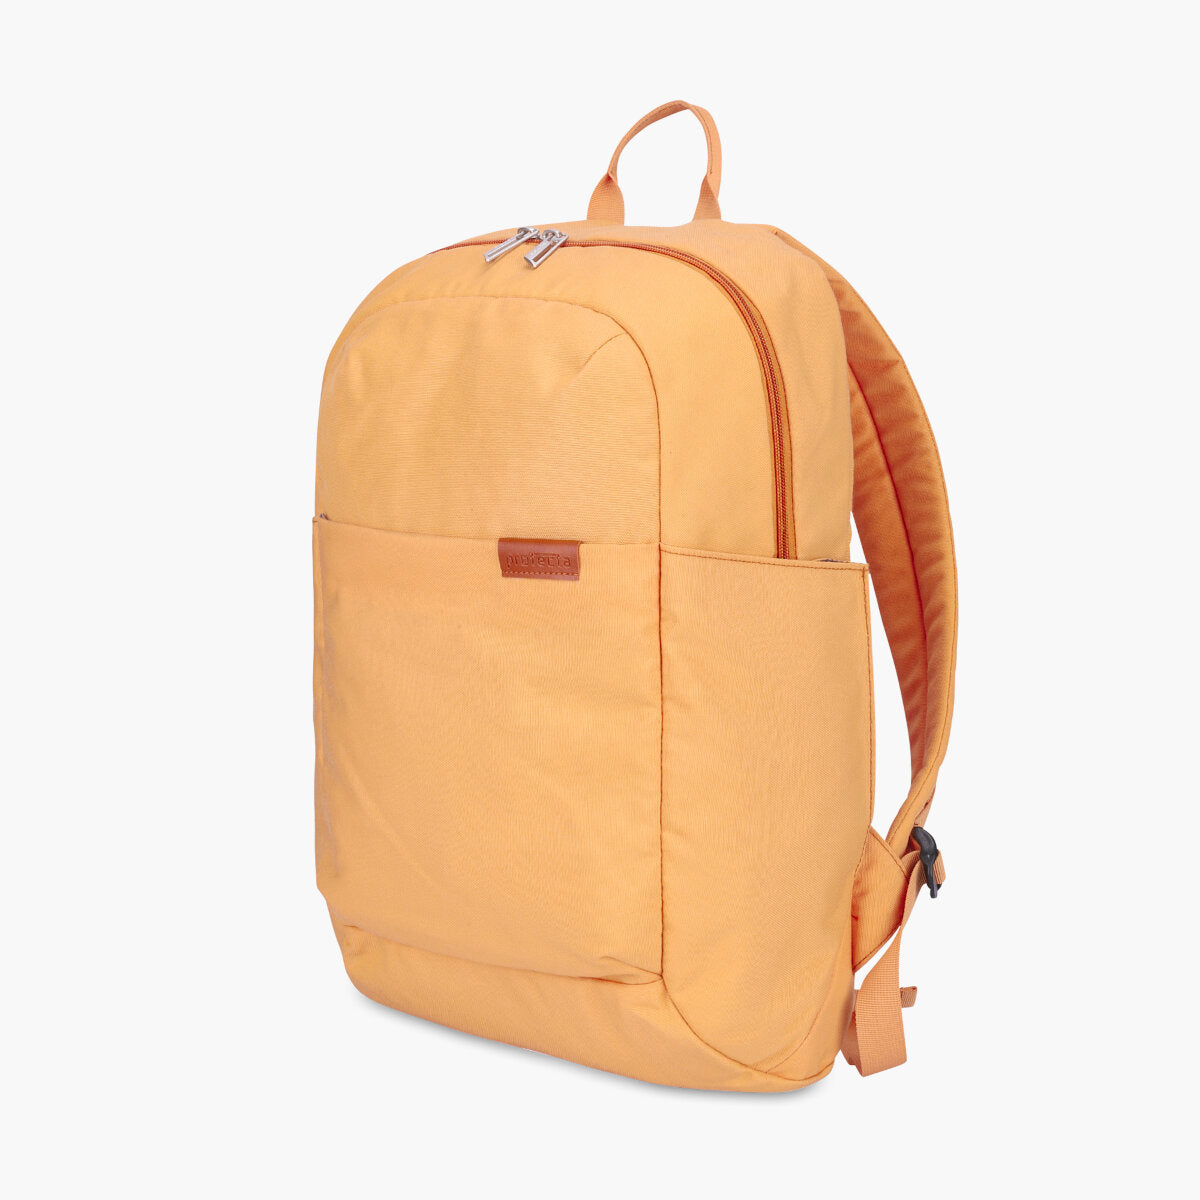 Yellow | Protecta Strong Buzz Laptop Backpack - 4